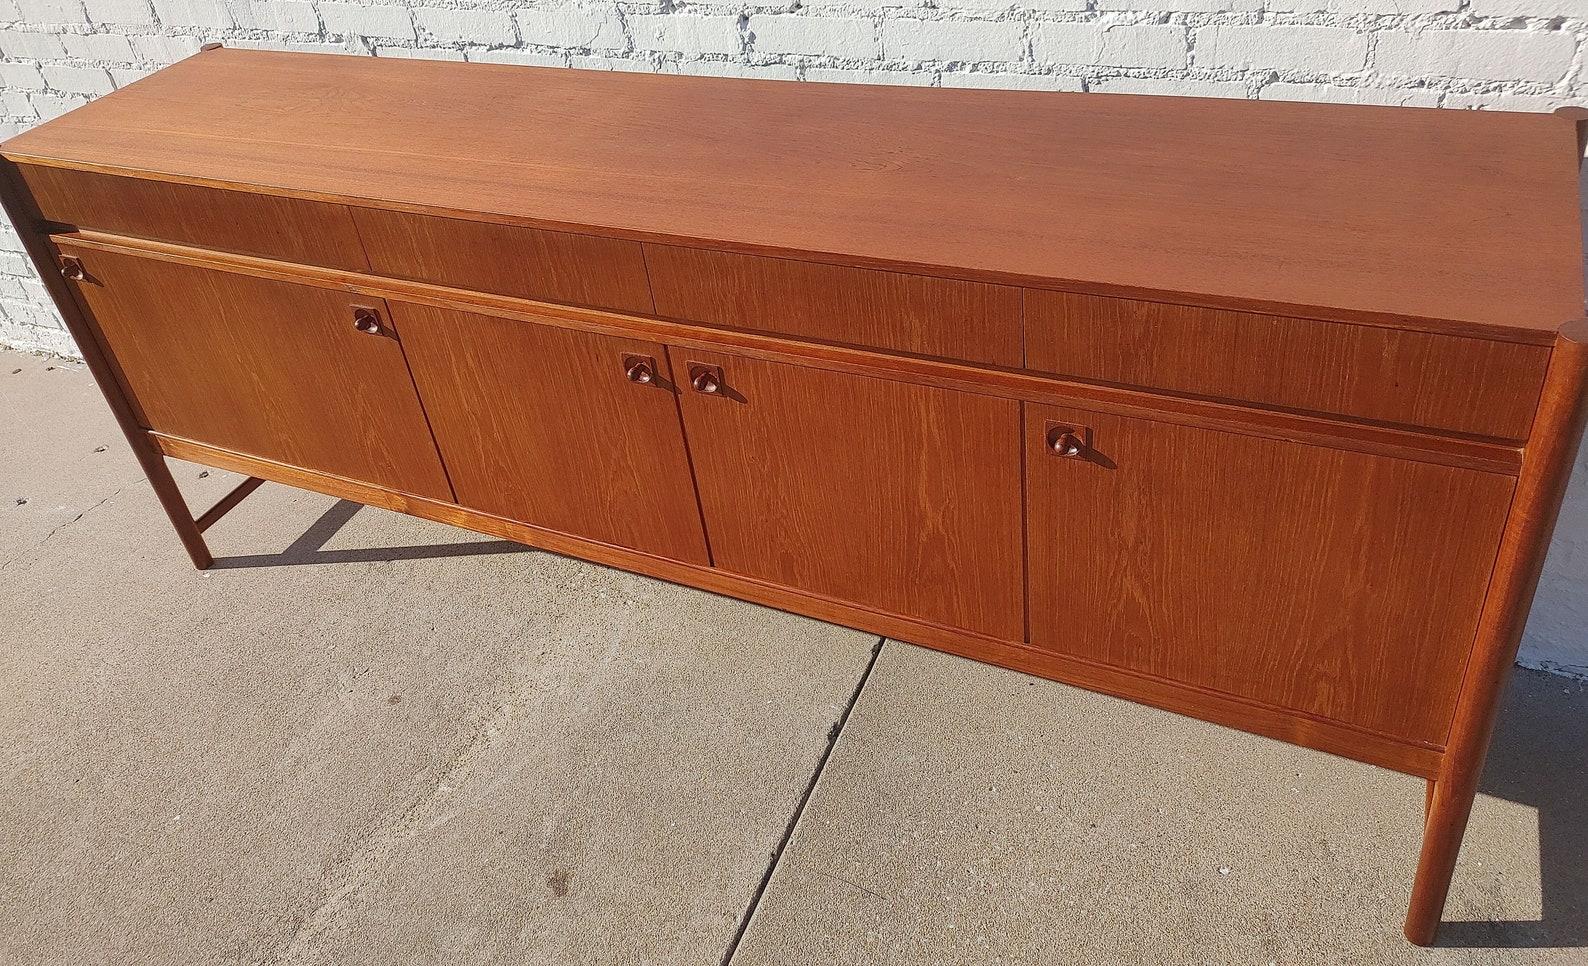 Mid Century Modern English Modern Teak Credenza by McIntosh

Above average vintage condition and structurally sound. Has some expected slight finish wear and scratching. Top has been refinished and does not have original factory finish. Finished